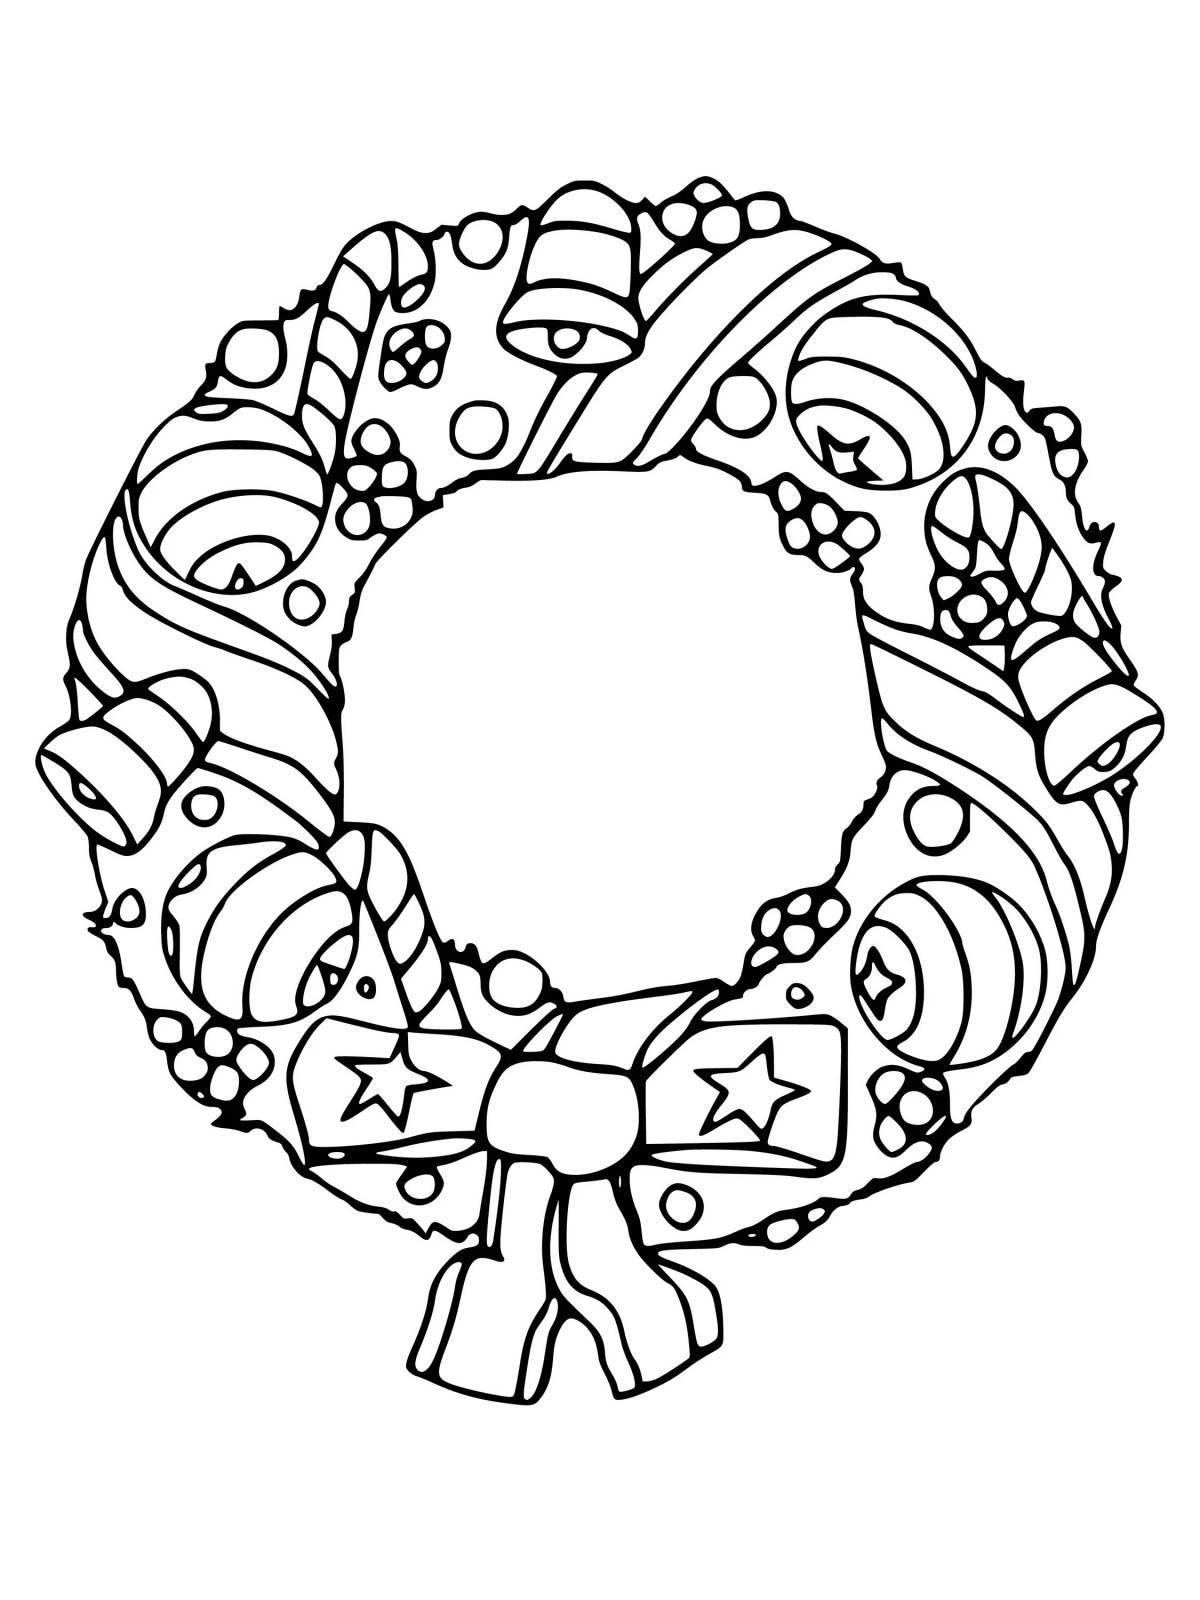 Fairy wreath coloring page